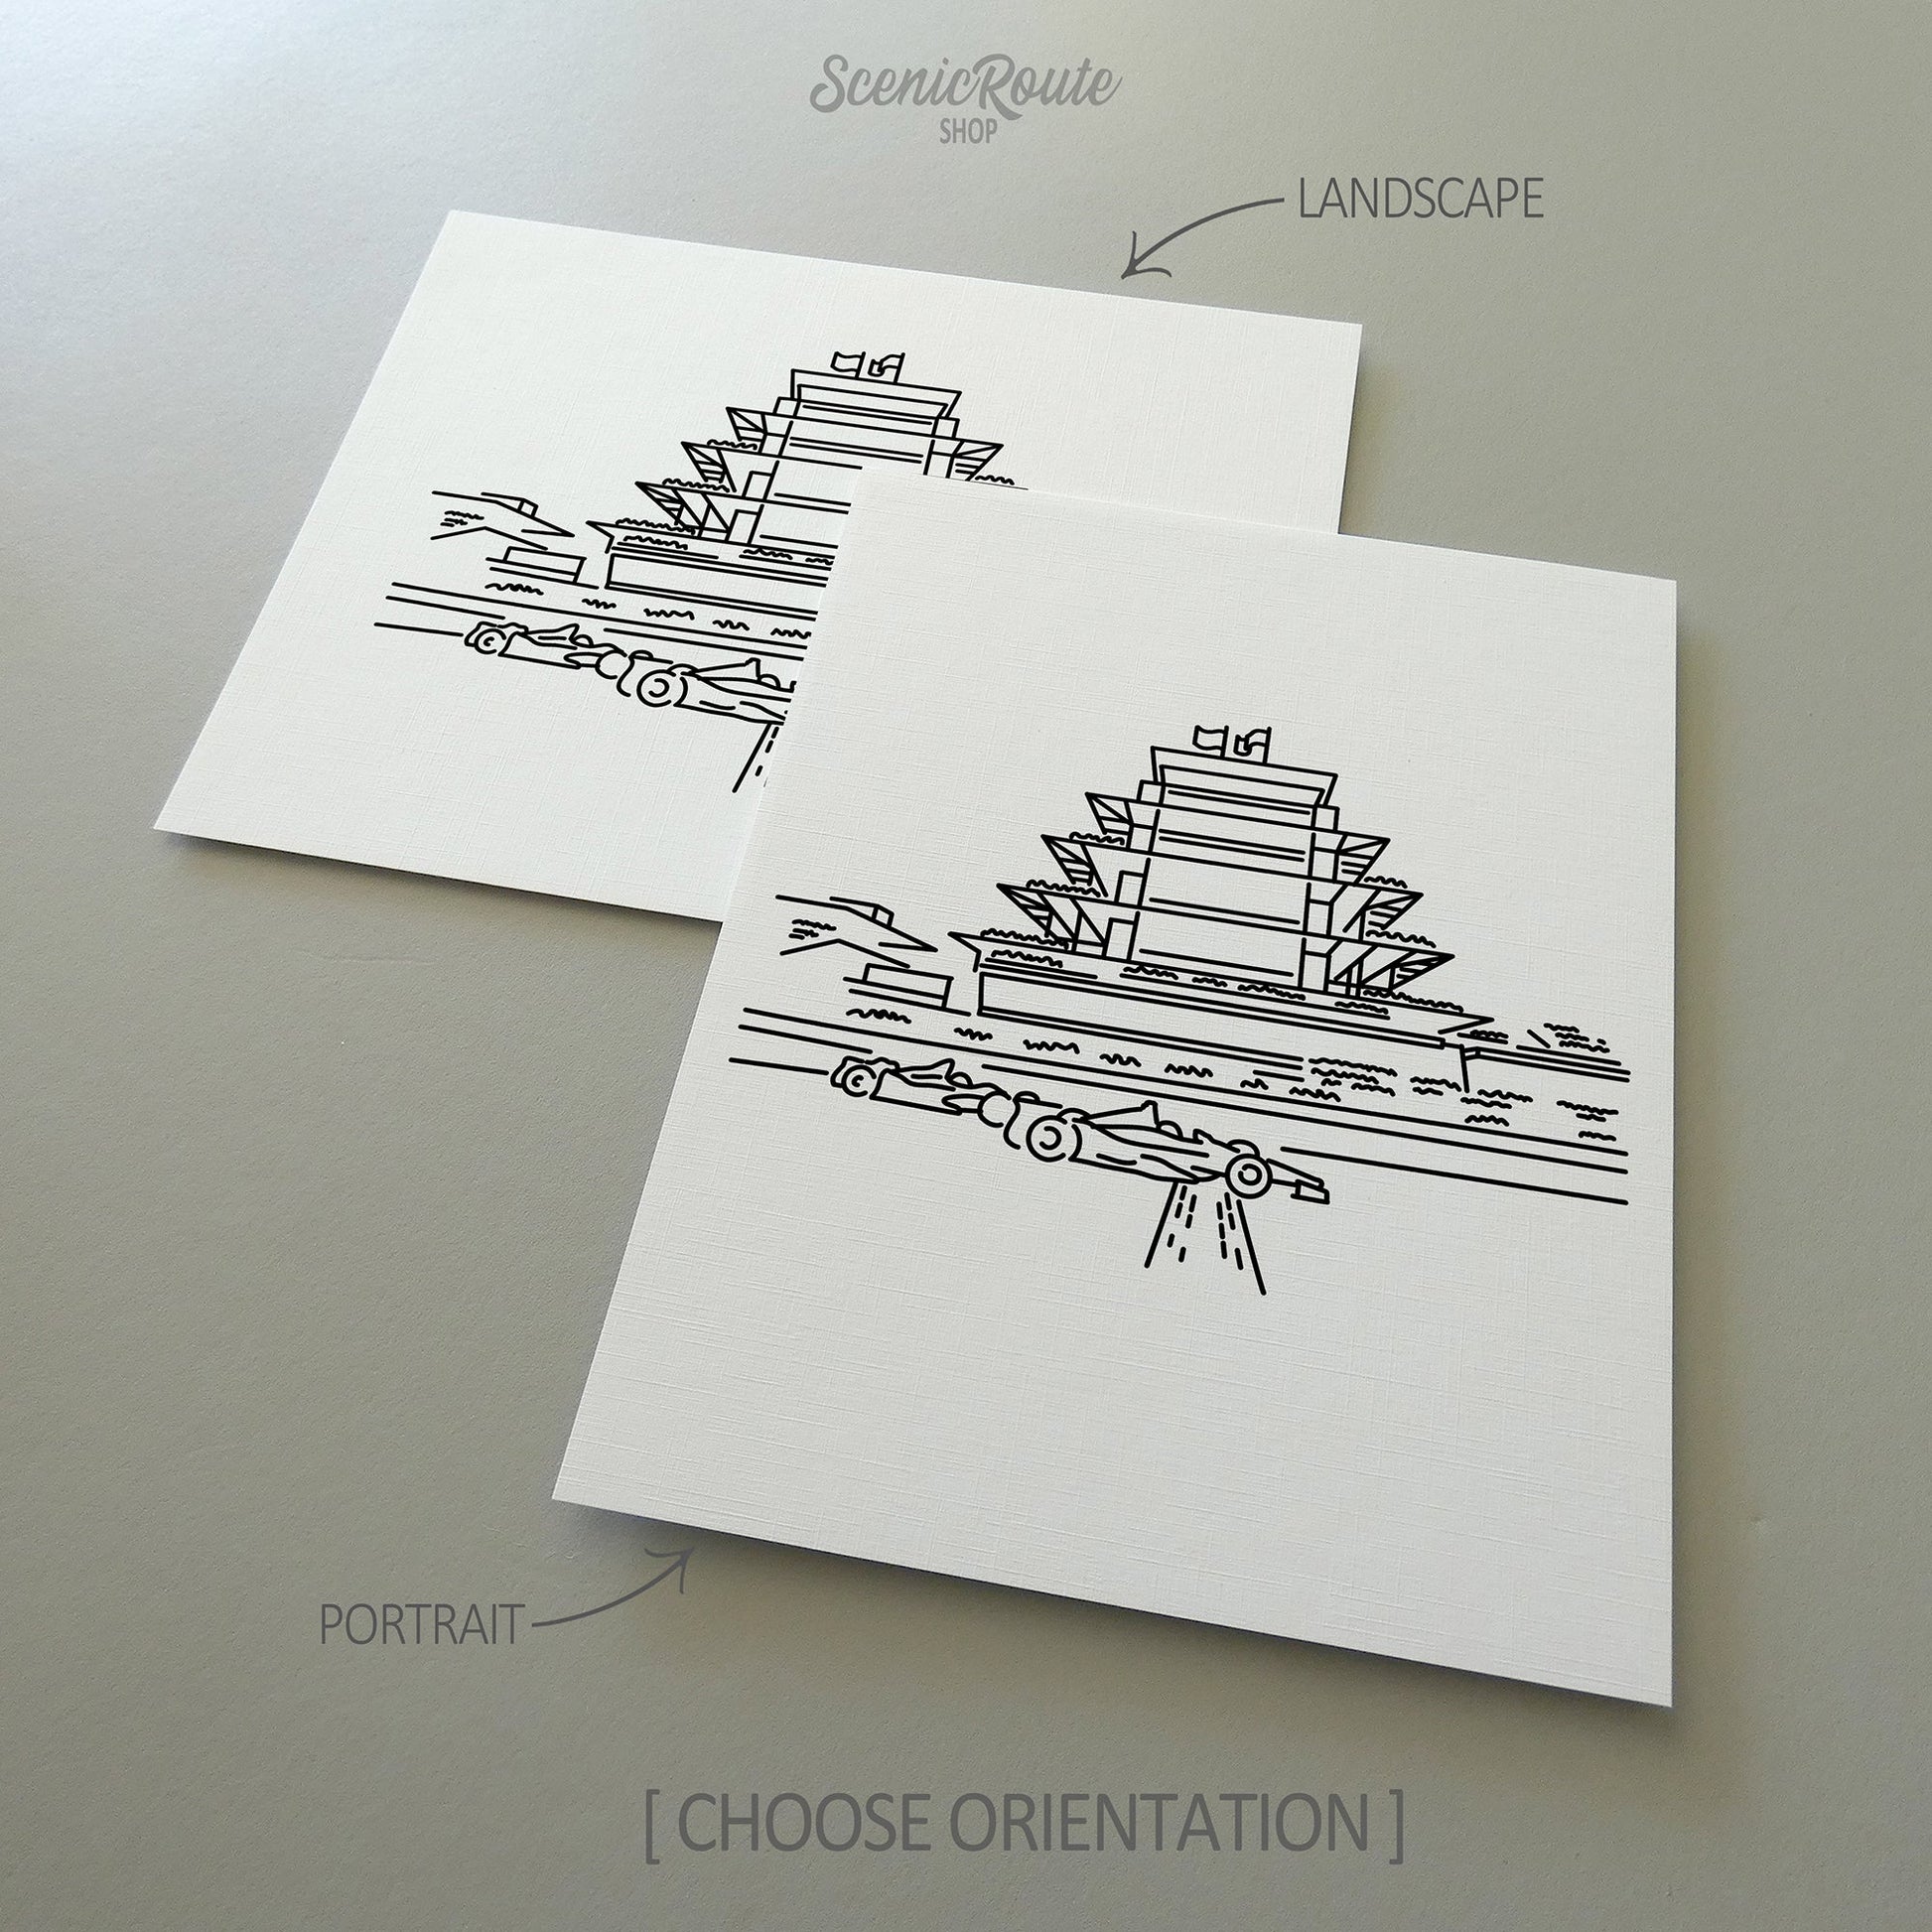 Two line art drawings of the Speedway Pagoda on white linen paper with a gray background.  The pieces are shown in portrait and landscape orientation for the available art print options.